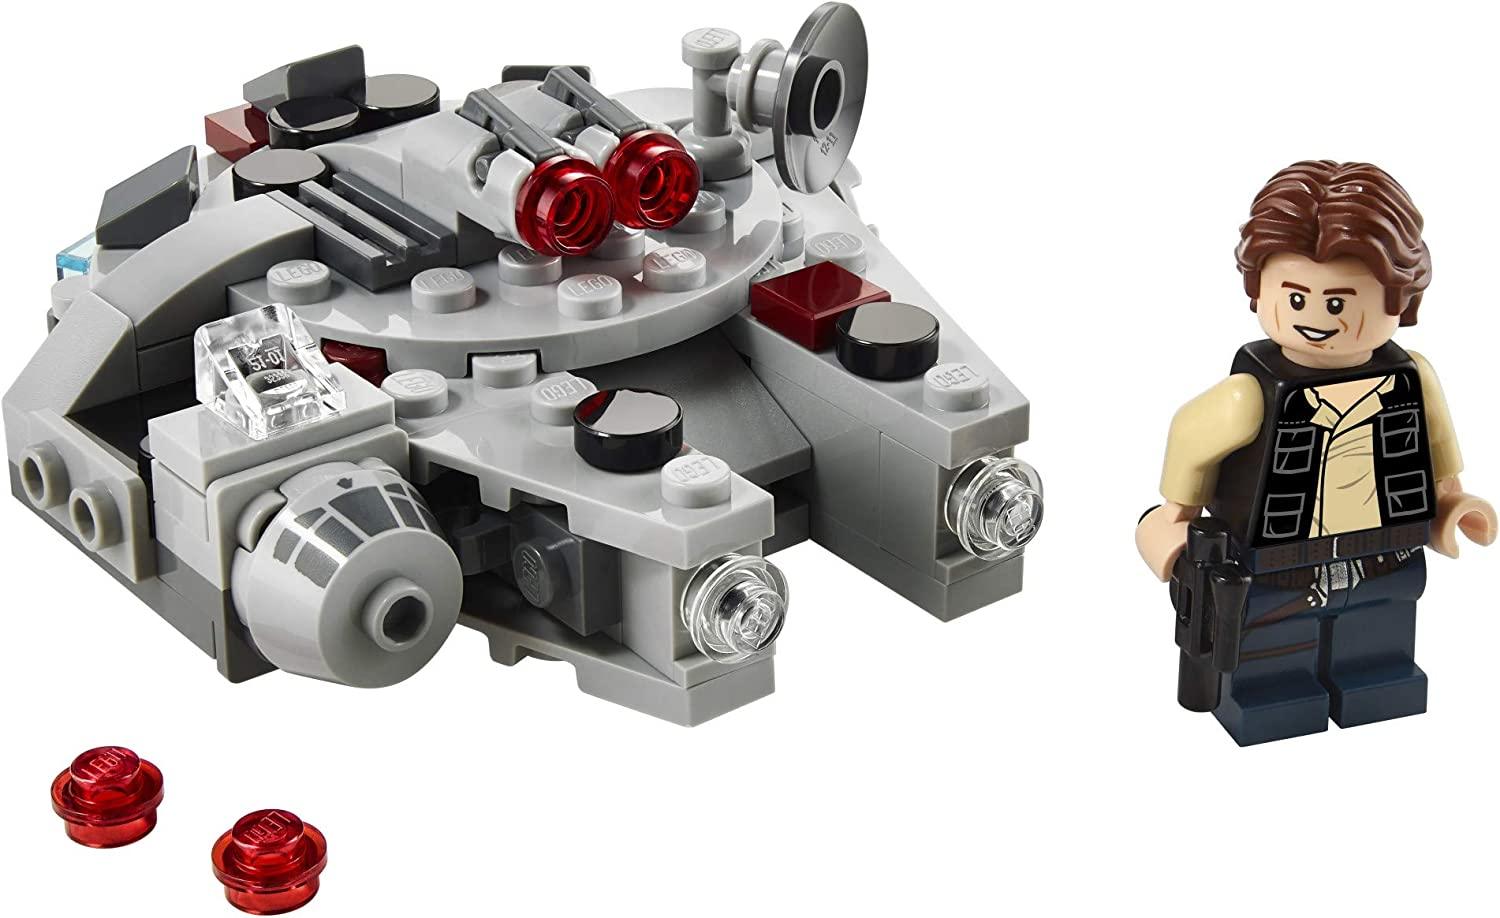 LEGO Star Wars Millennium Falcon Microfighter Building Kit for Ages 6+ - FunCorp India